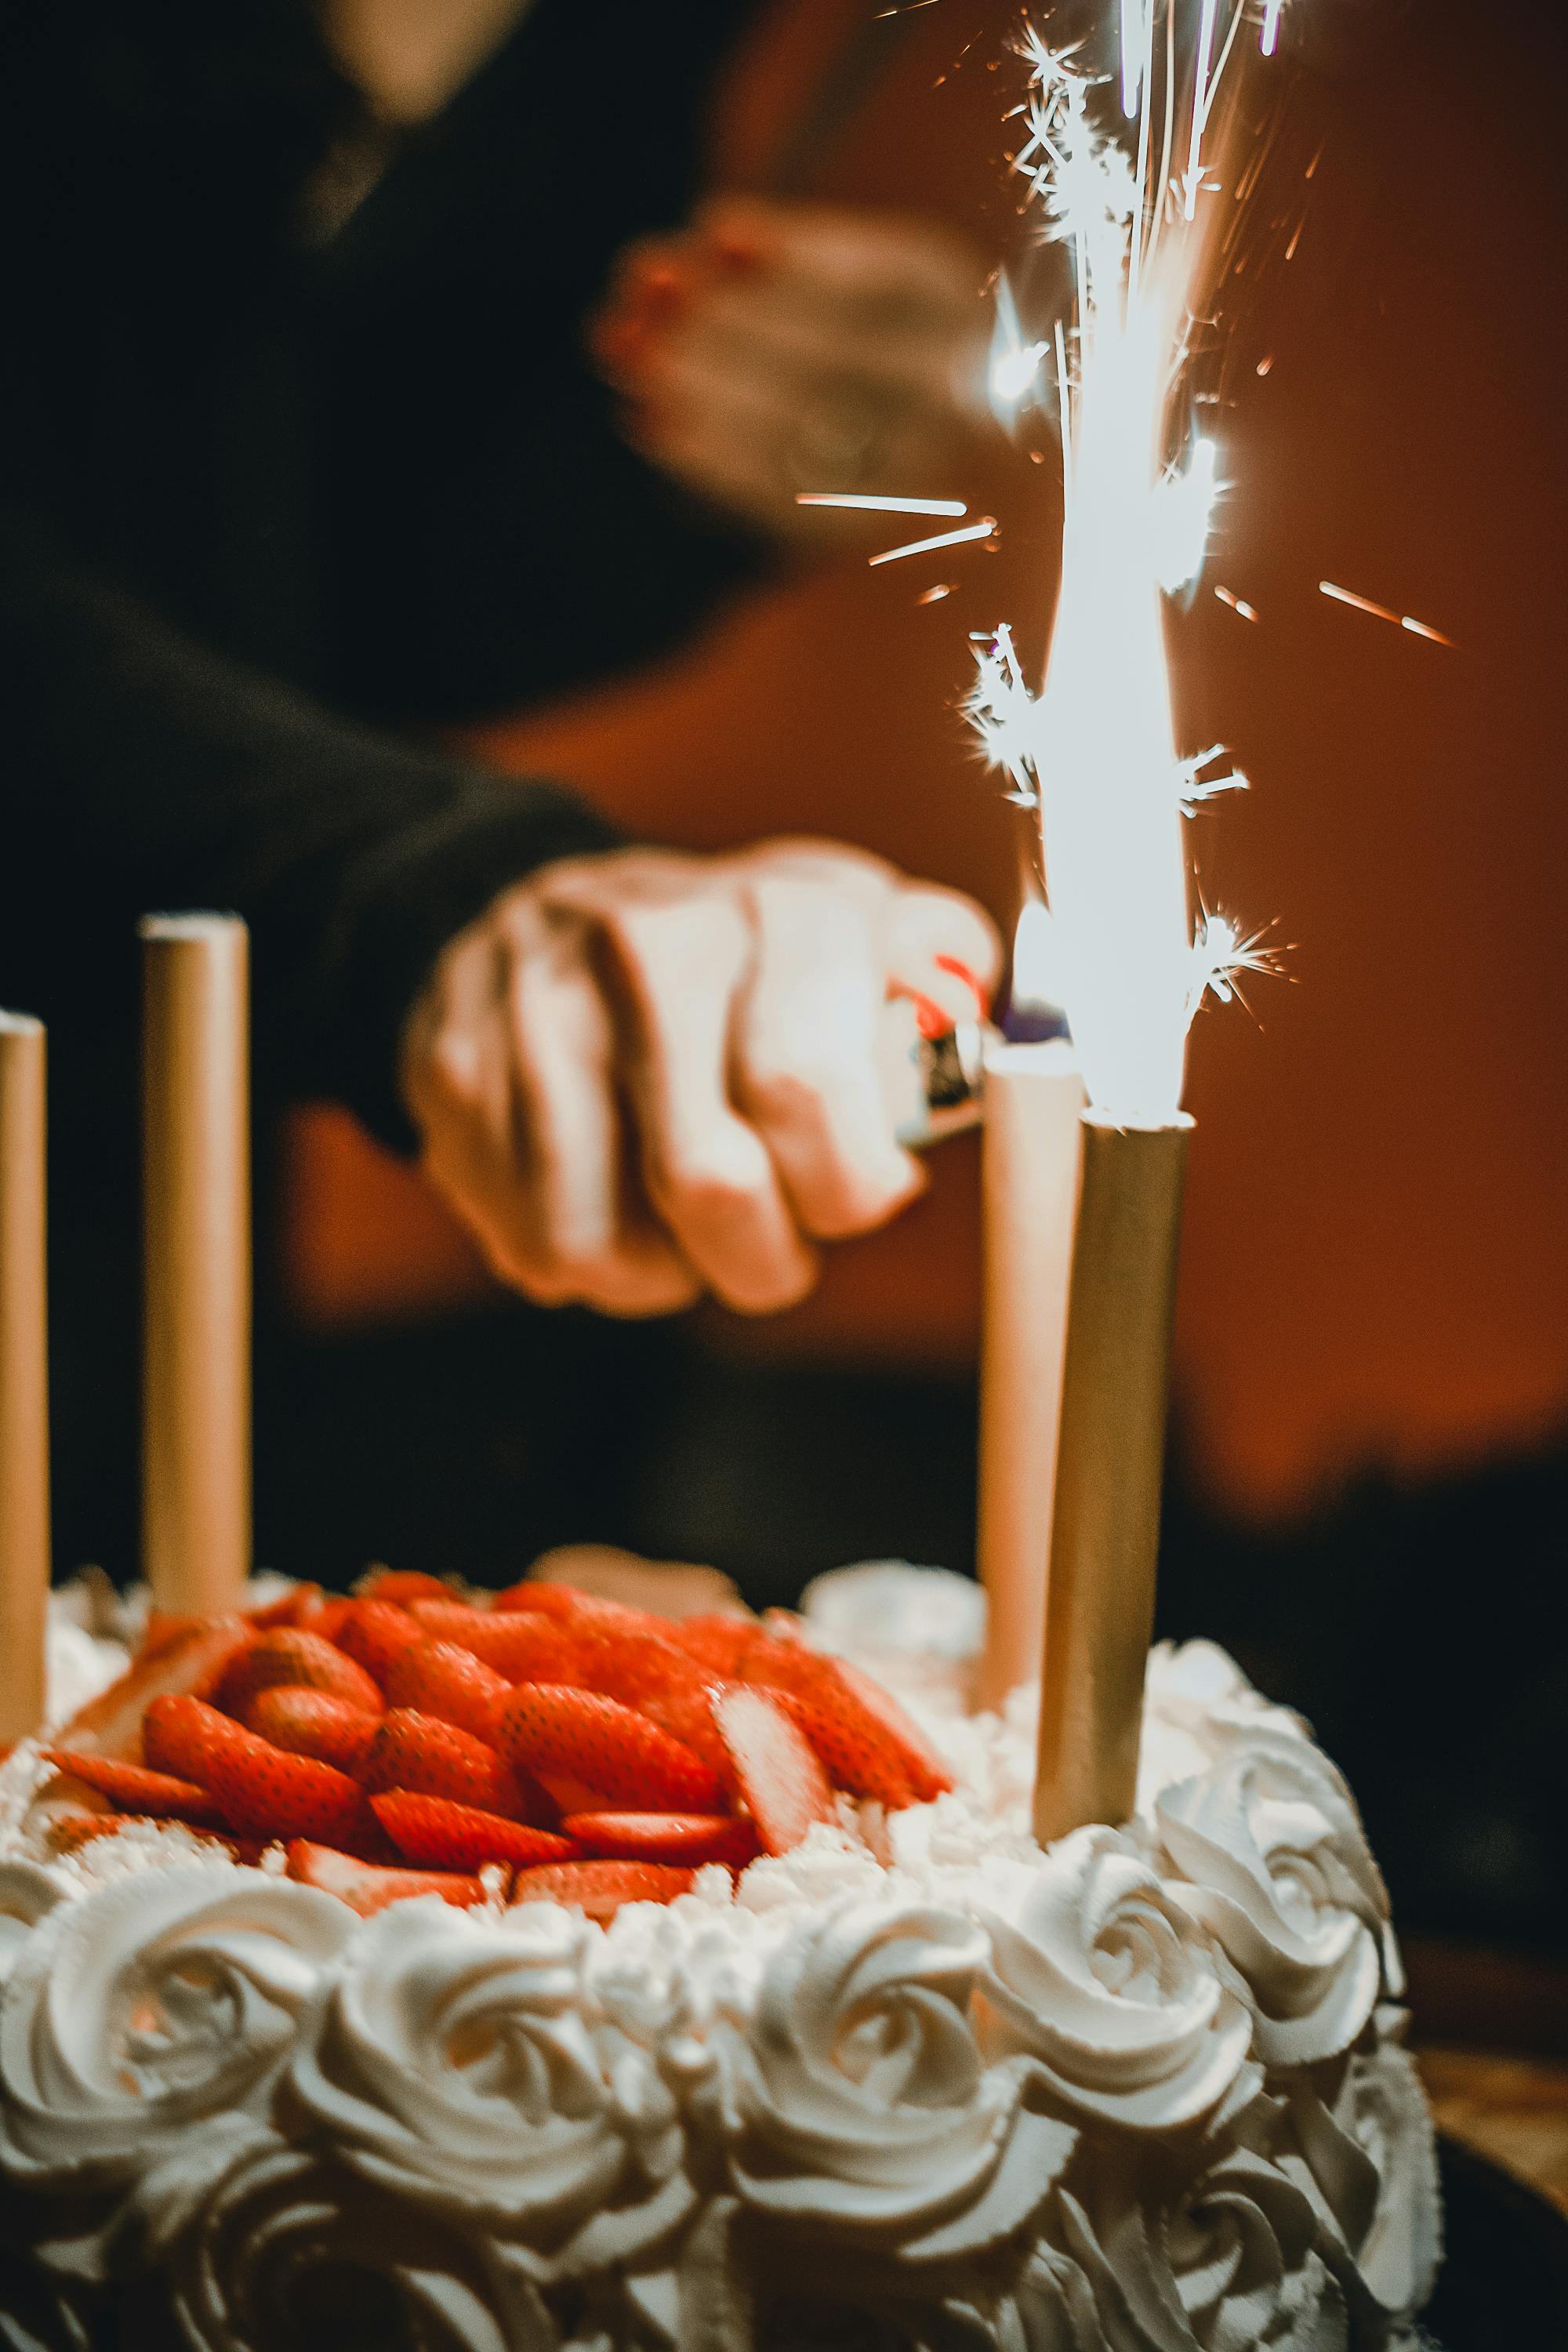 Candle lighting | Source: Pexels